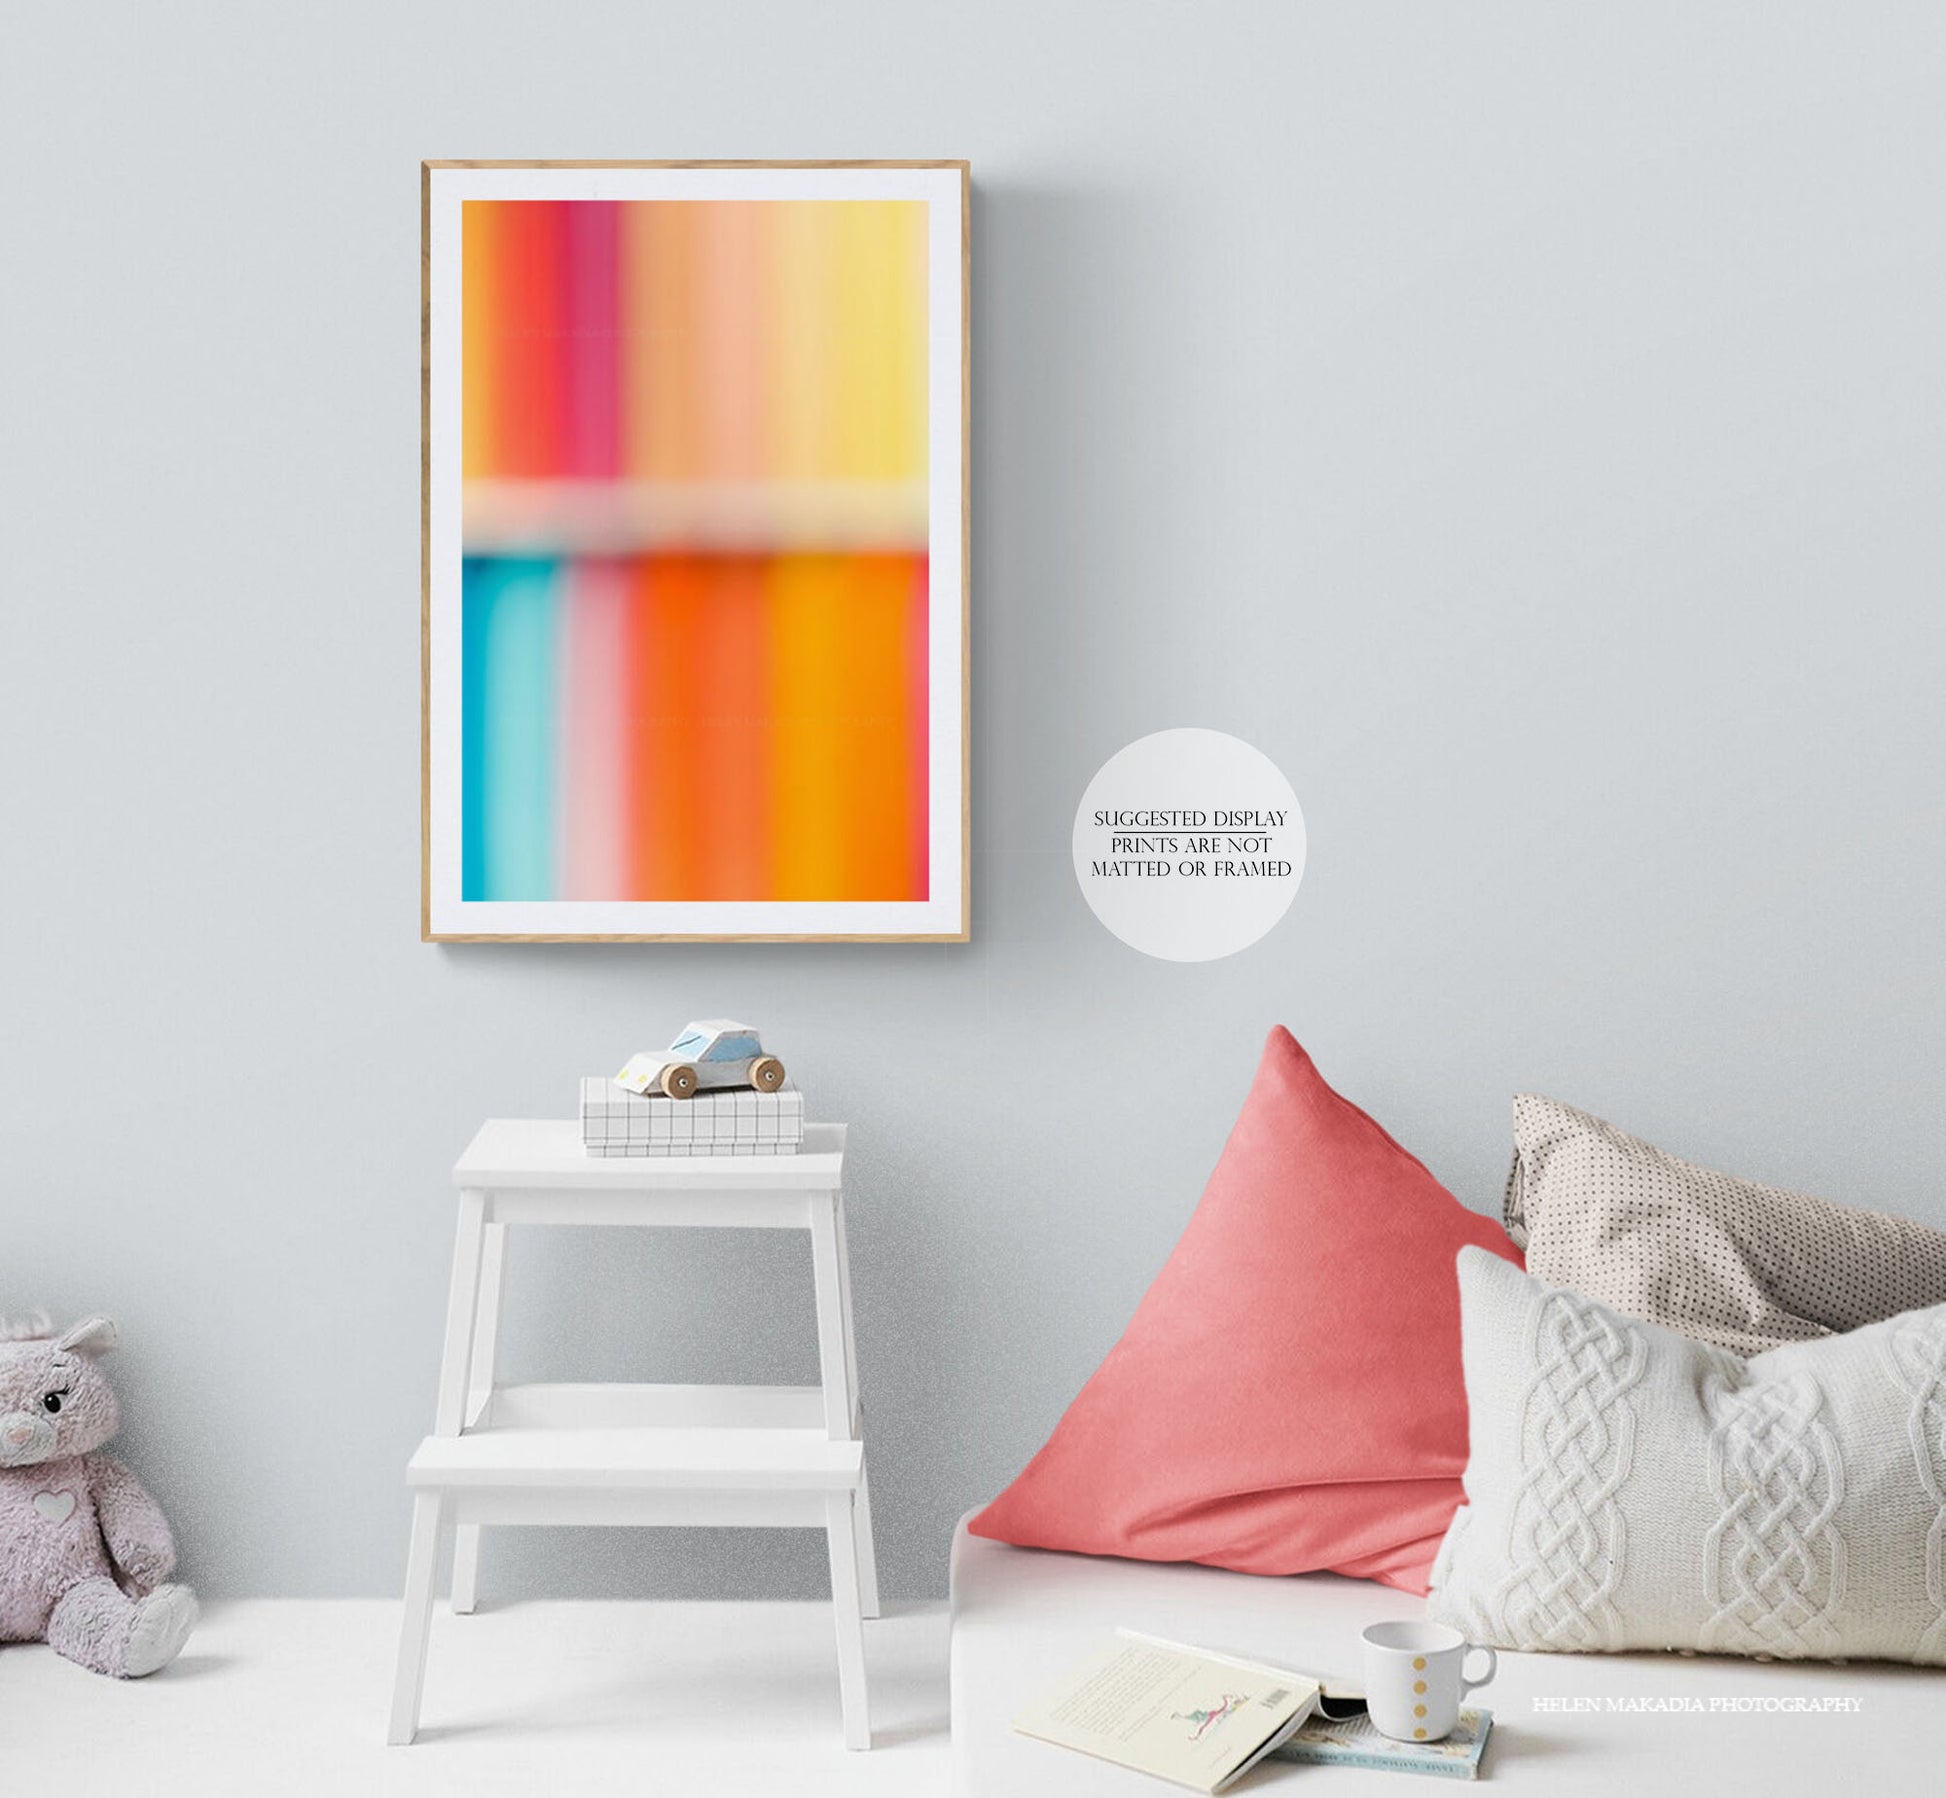 Palette of Bright Summer Colors Photograph Print Framed in a Playroom